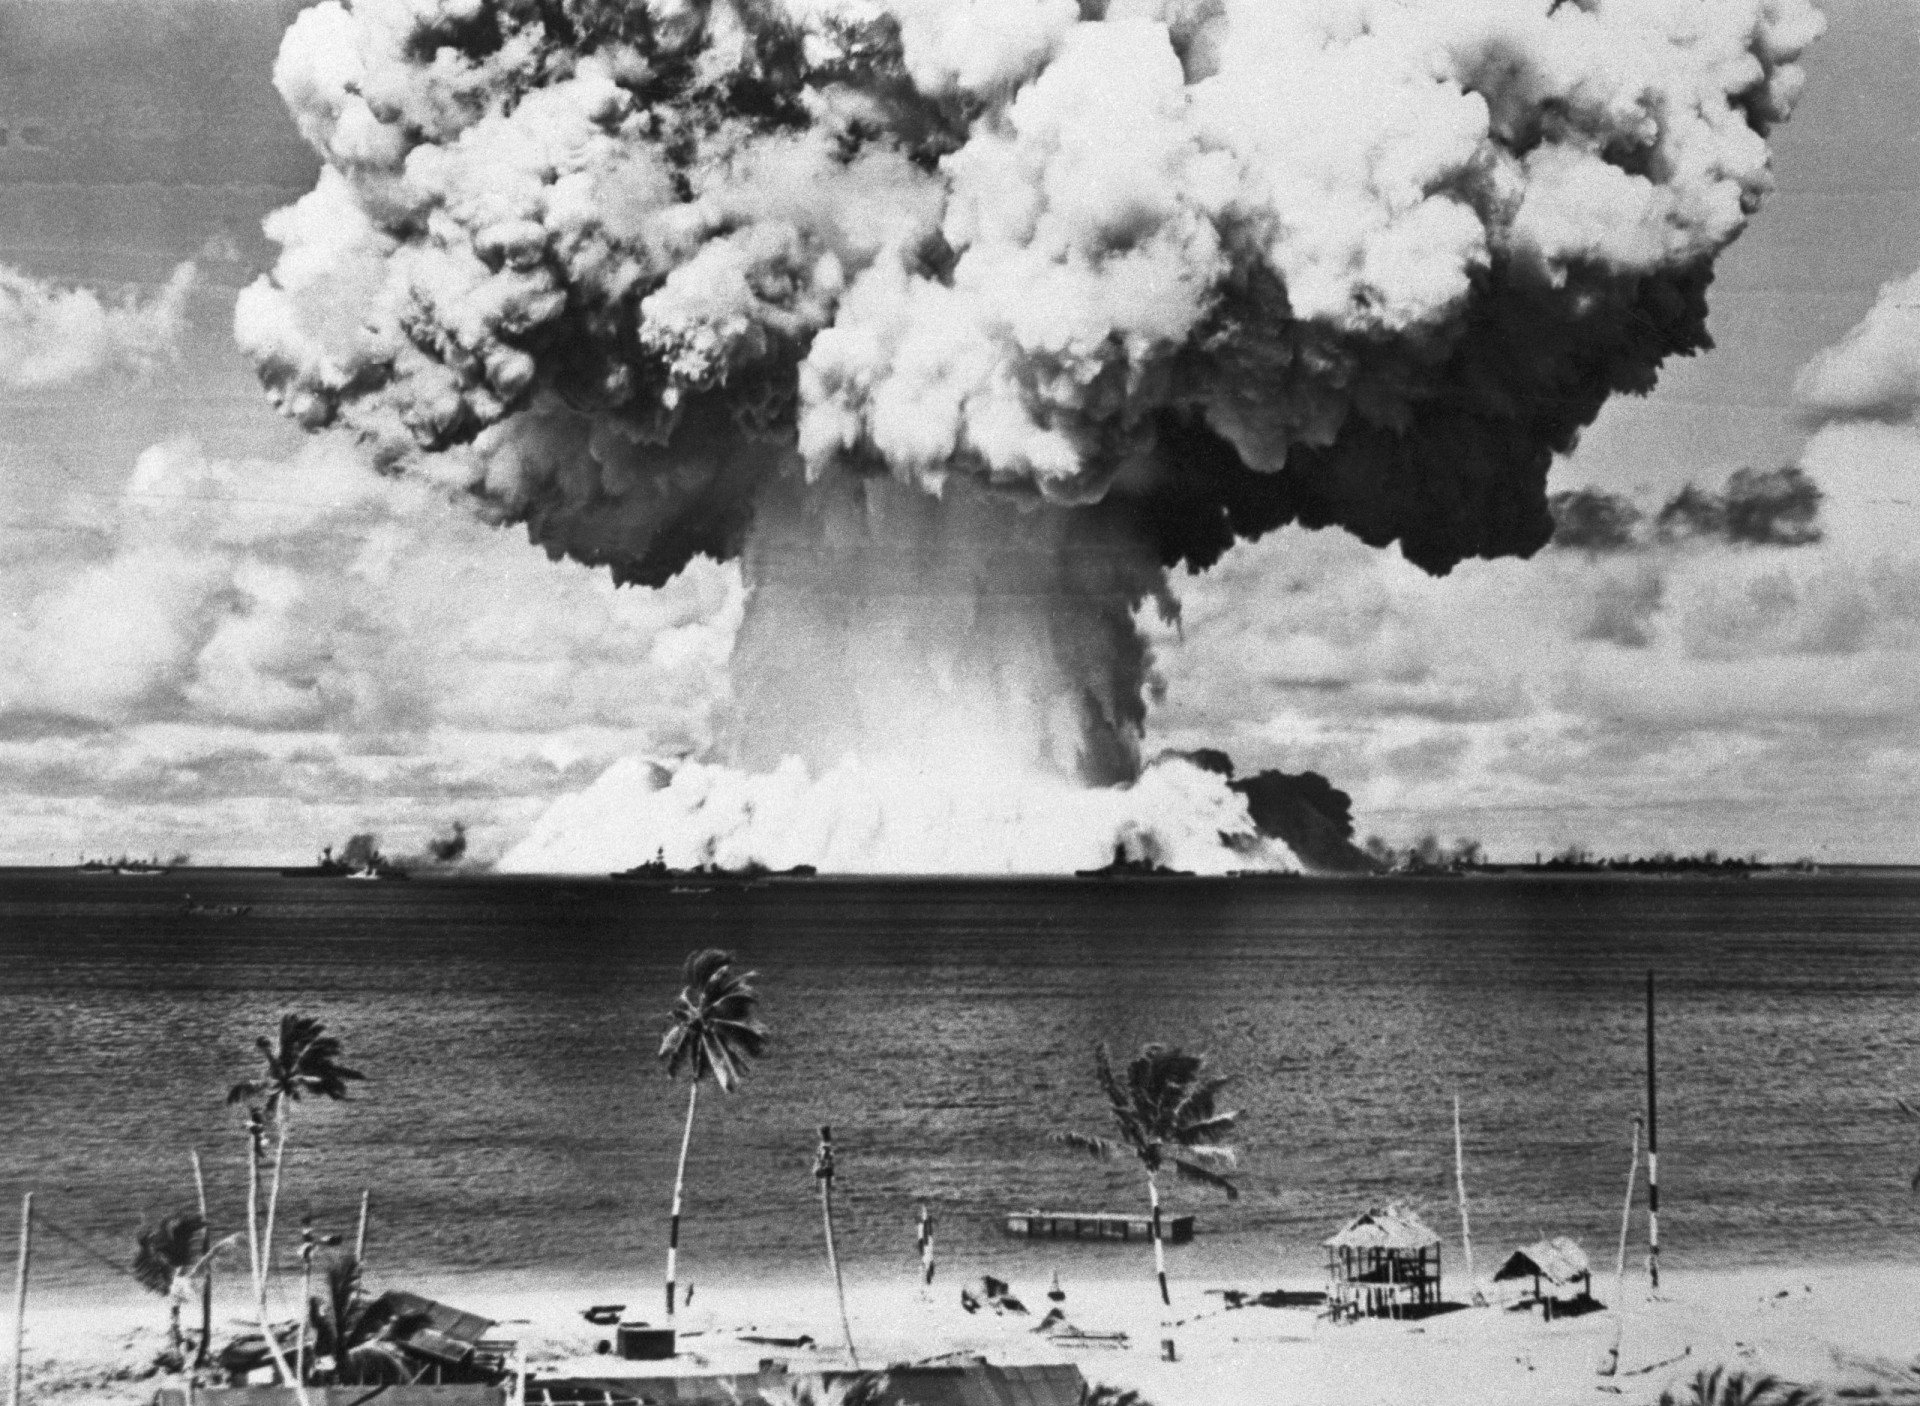 <p>Located about halfway between Hawaii and Australia, residents of Bikini Atoll were forcibly relocated when the US took possession of the island chain in 1946.</p><p><a href="https://www.msn.com/en-us/community/channel/vid-7xx8mnucu55yw63we9va2gwr7uihbxwc68fxqp25x6tg4ftibpra?cvid=94631541bc0f4f89bfd59158d696ad7e">Follow us and access great exclusive content every day</a></p>